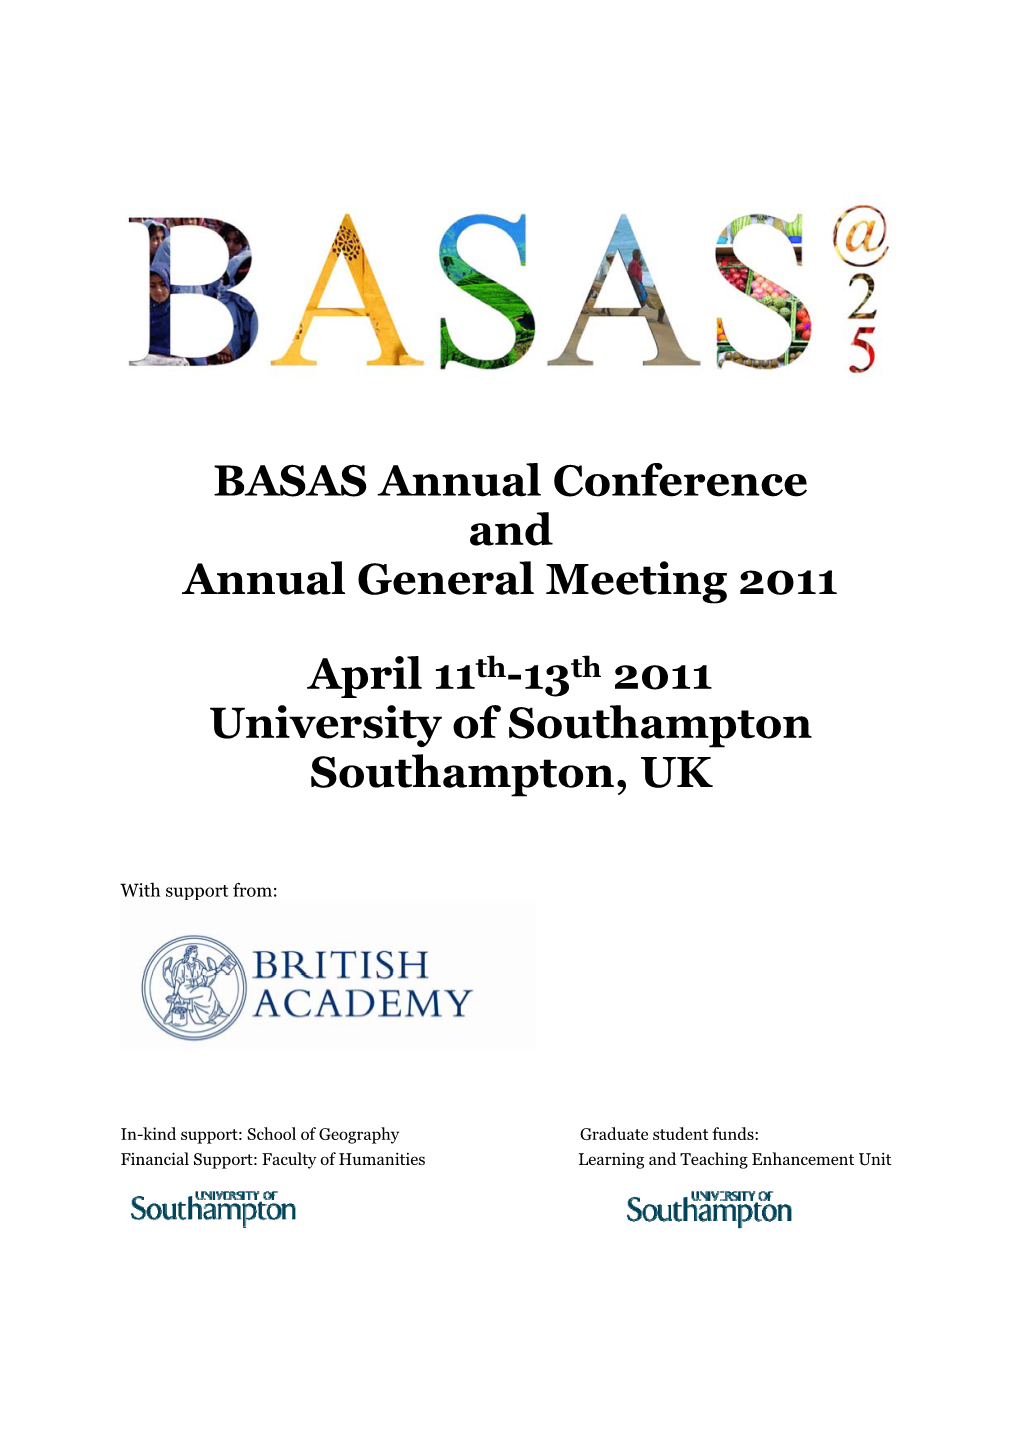 BASAS Annual Conference and Annual General Meeting 2011 April